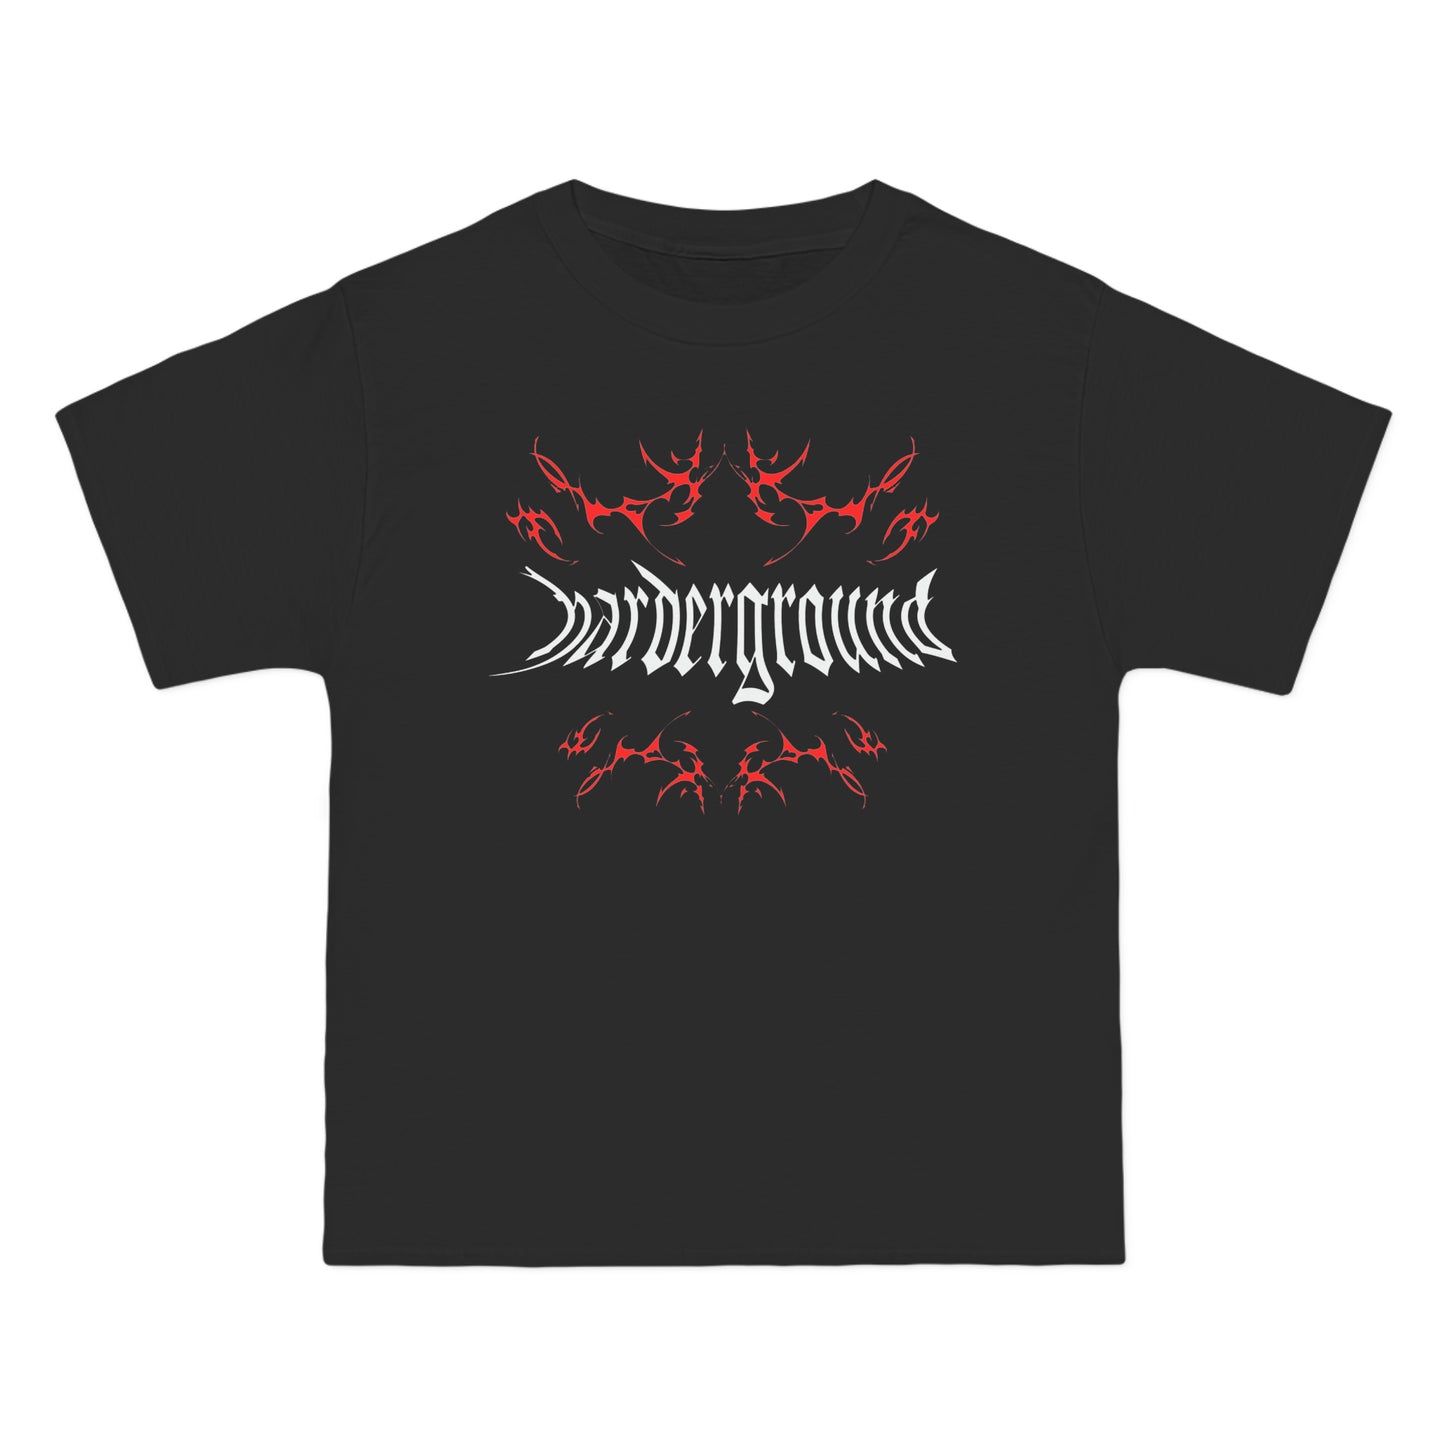 METAL CRW Harderground - Front logo only - Beefy-T® Short-Sleeve T-Shirt